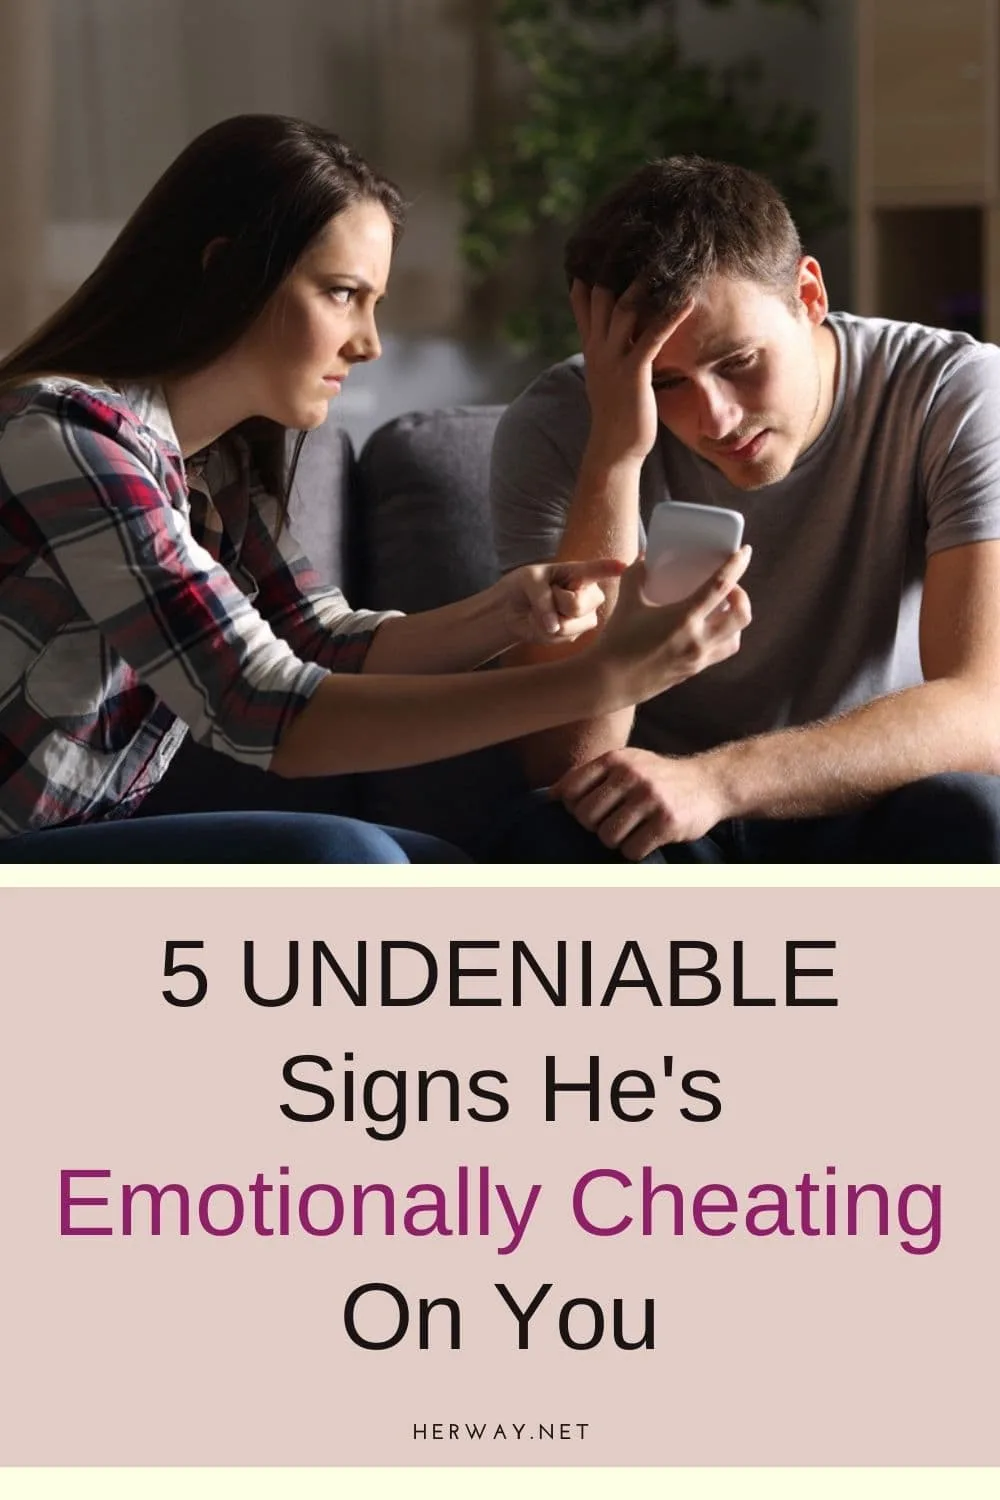 5 UNDENIABLE Signs He's Emotionally Cheating On You